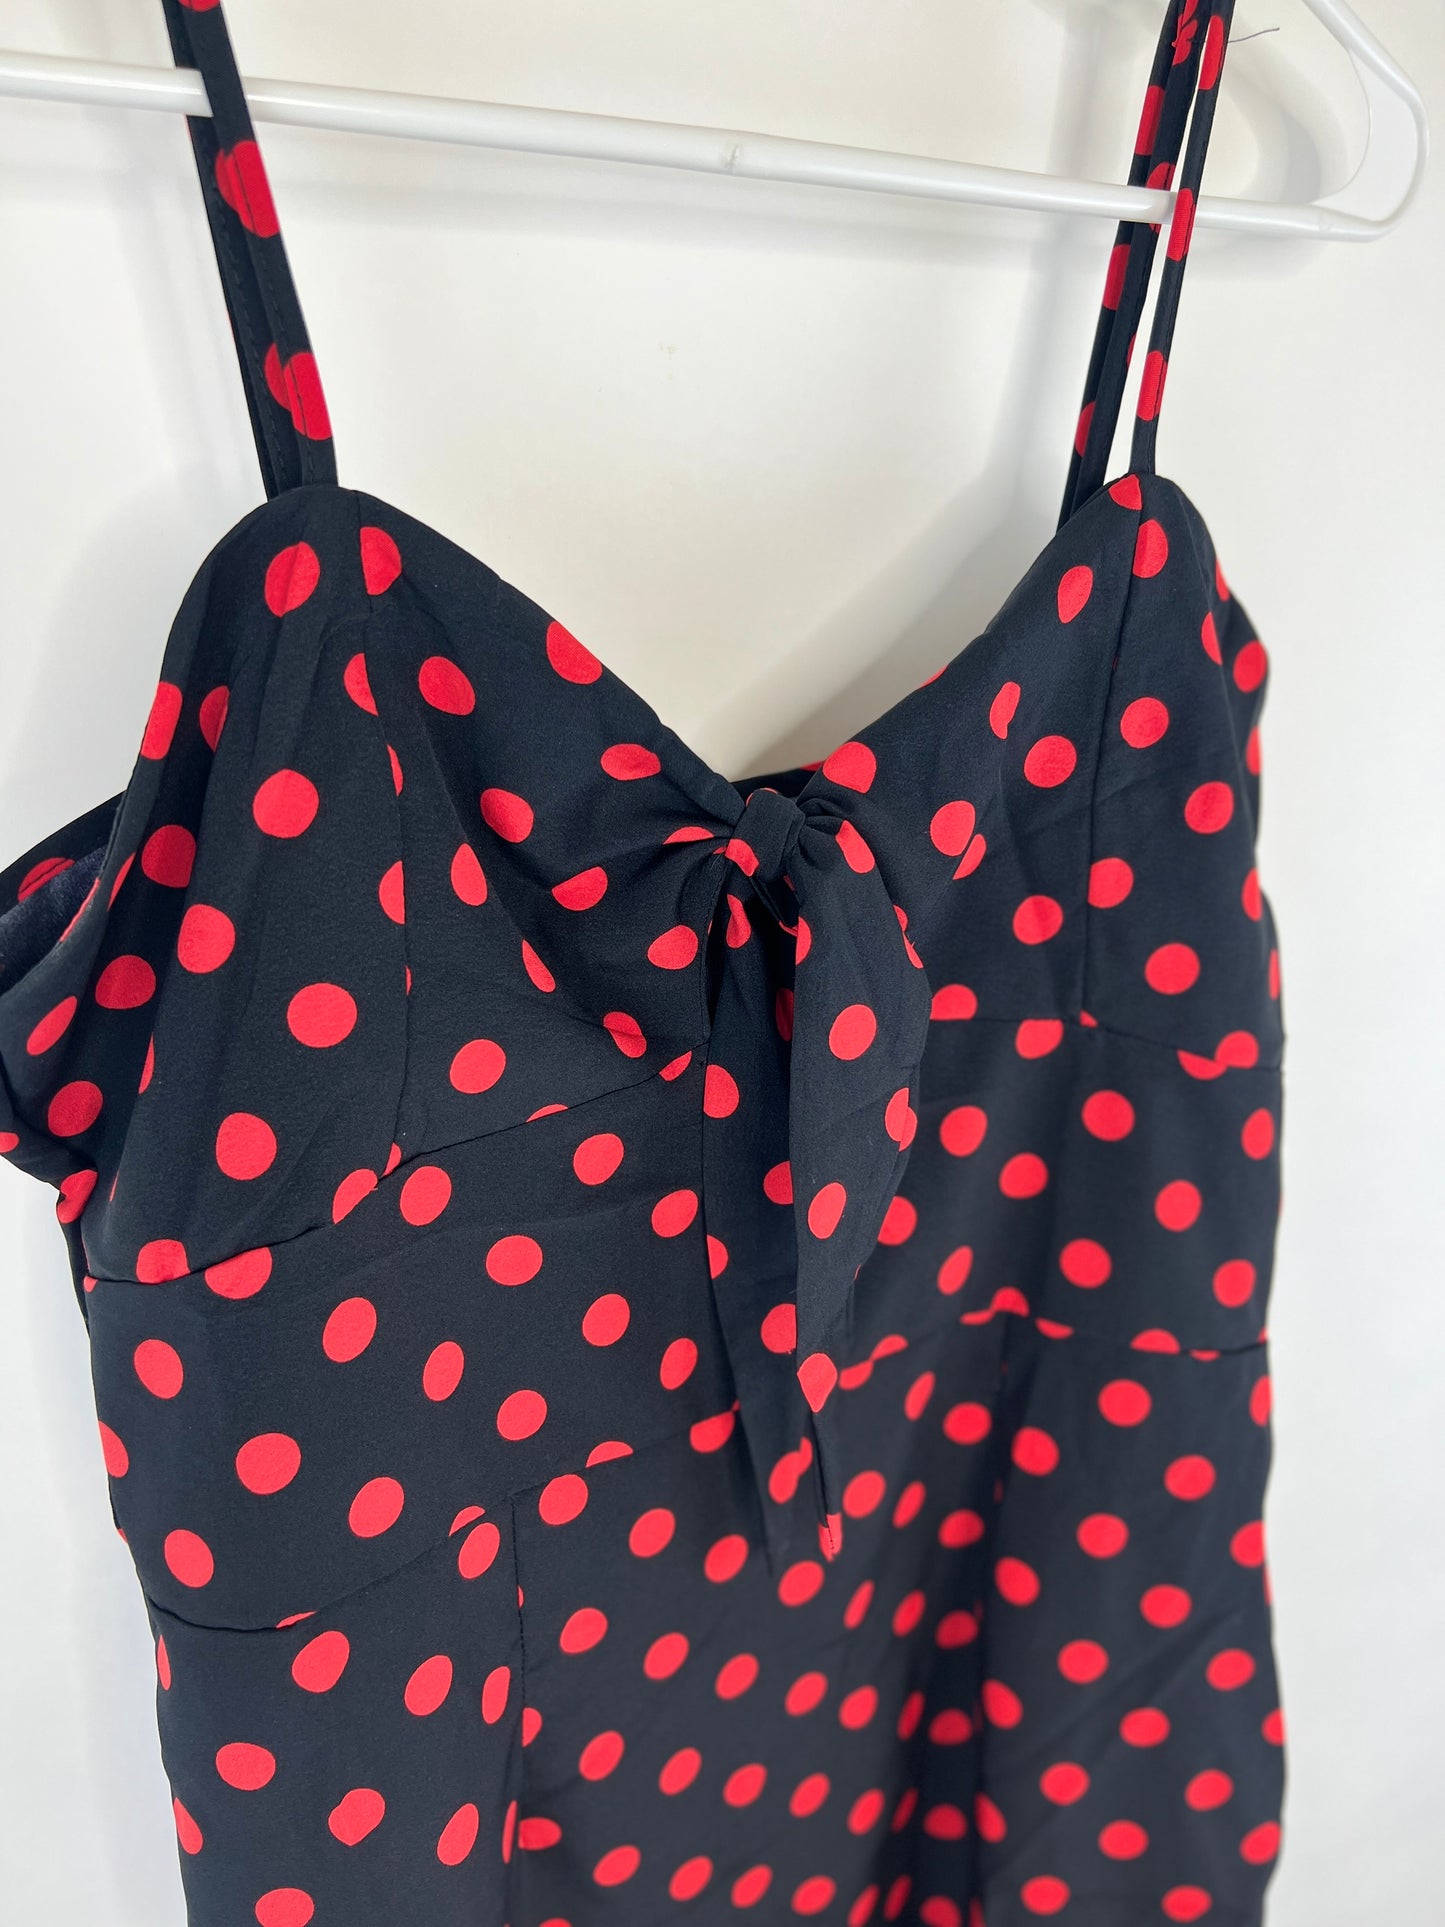 NWT - Tie Front Black with Red Dots Spaghetti Strap Mini Dress - S/M